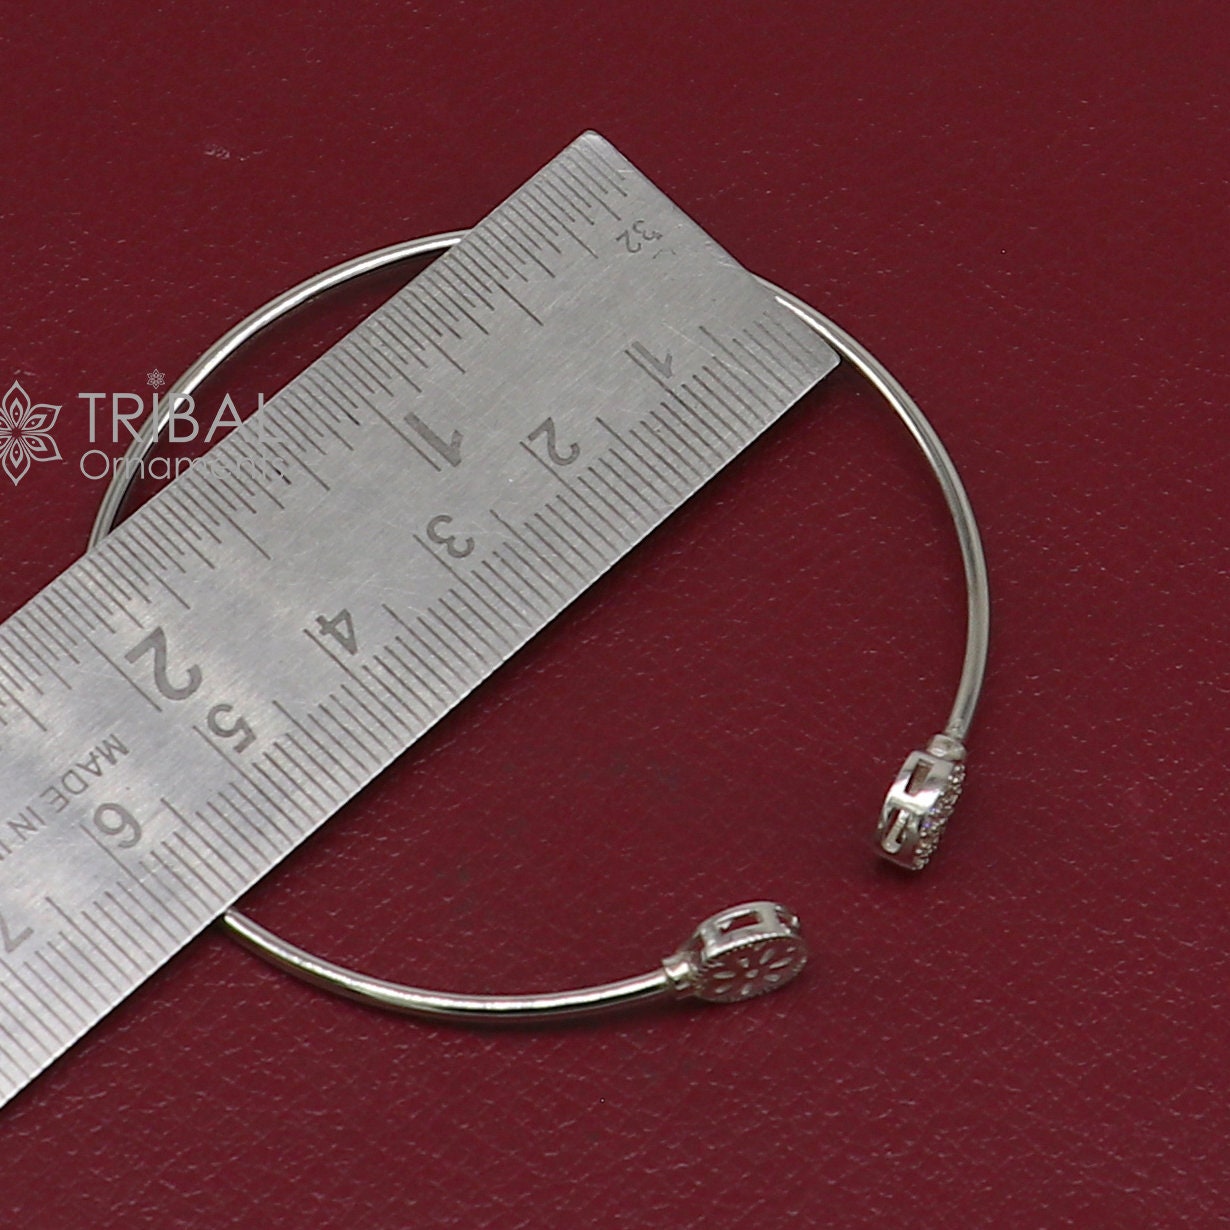 925 sterling silver handmade amazing trendy stylish girl's cuff kada bracelet, best delicate unique light weight gifting for girls cuff171 - TRIBAL ORNAMENTS